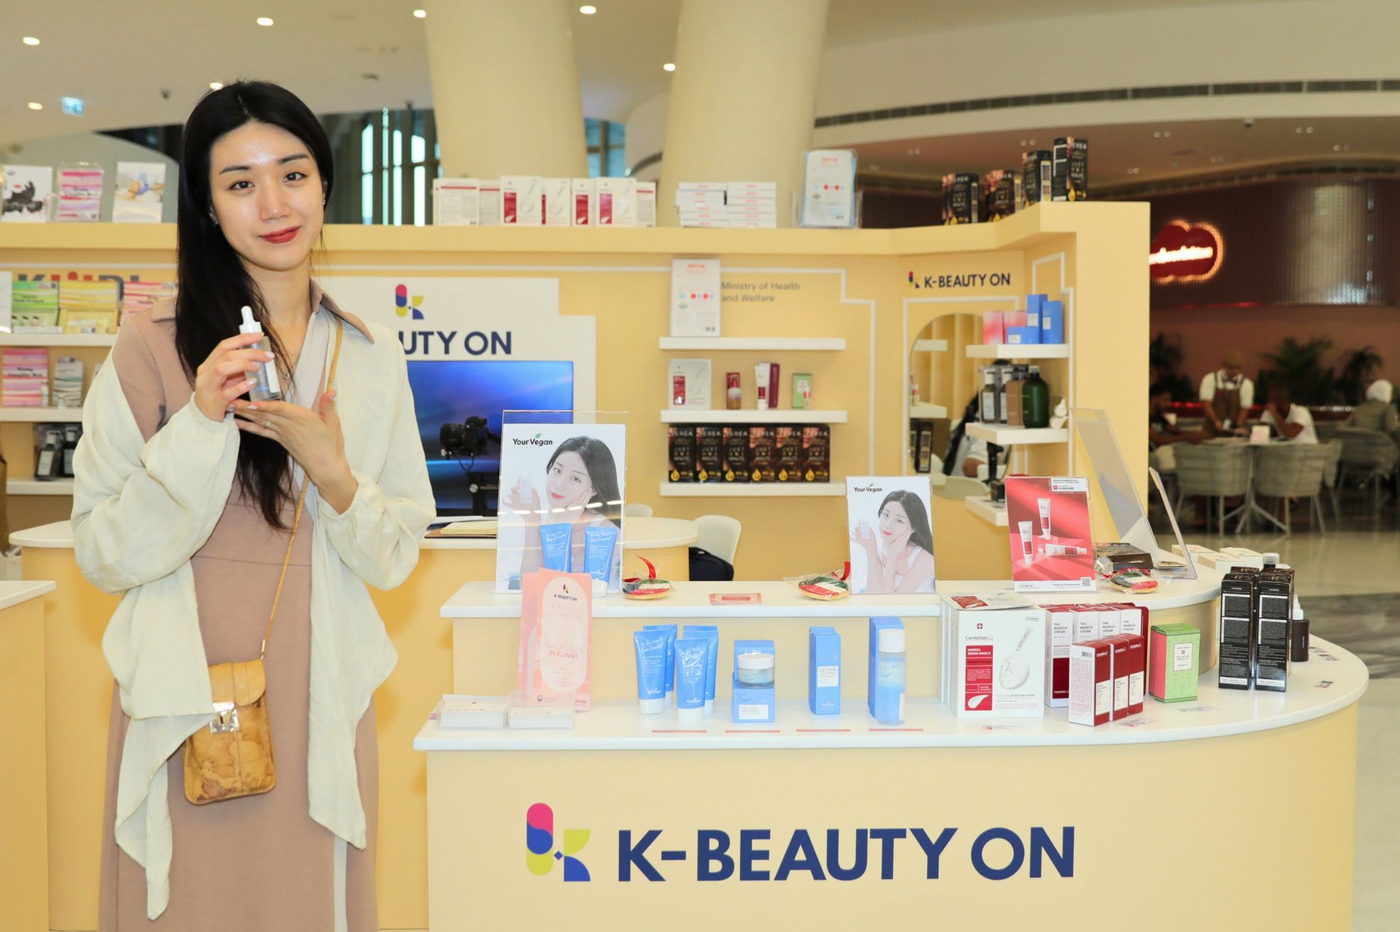 Korean woman smiling and holding sunscreen bottle by K-Beauty On